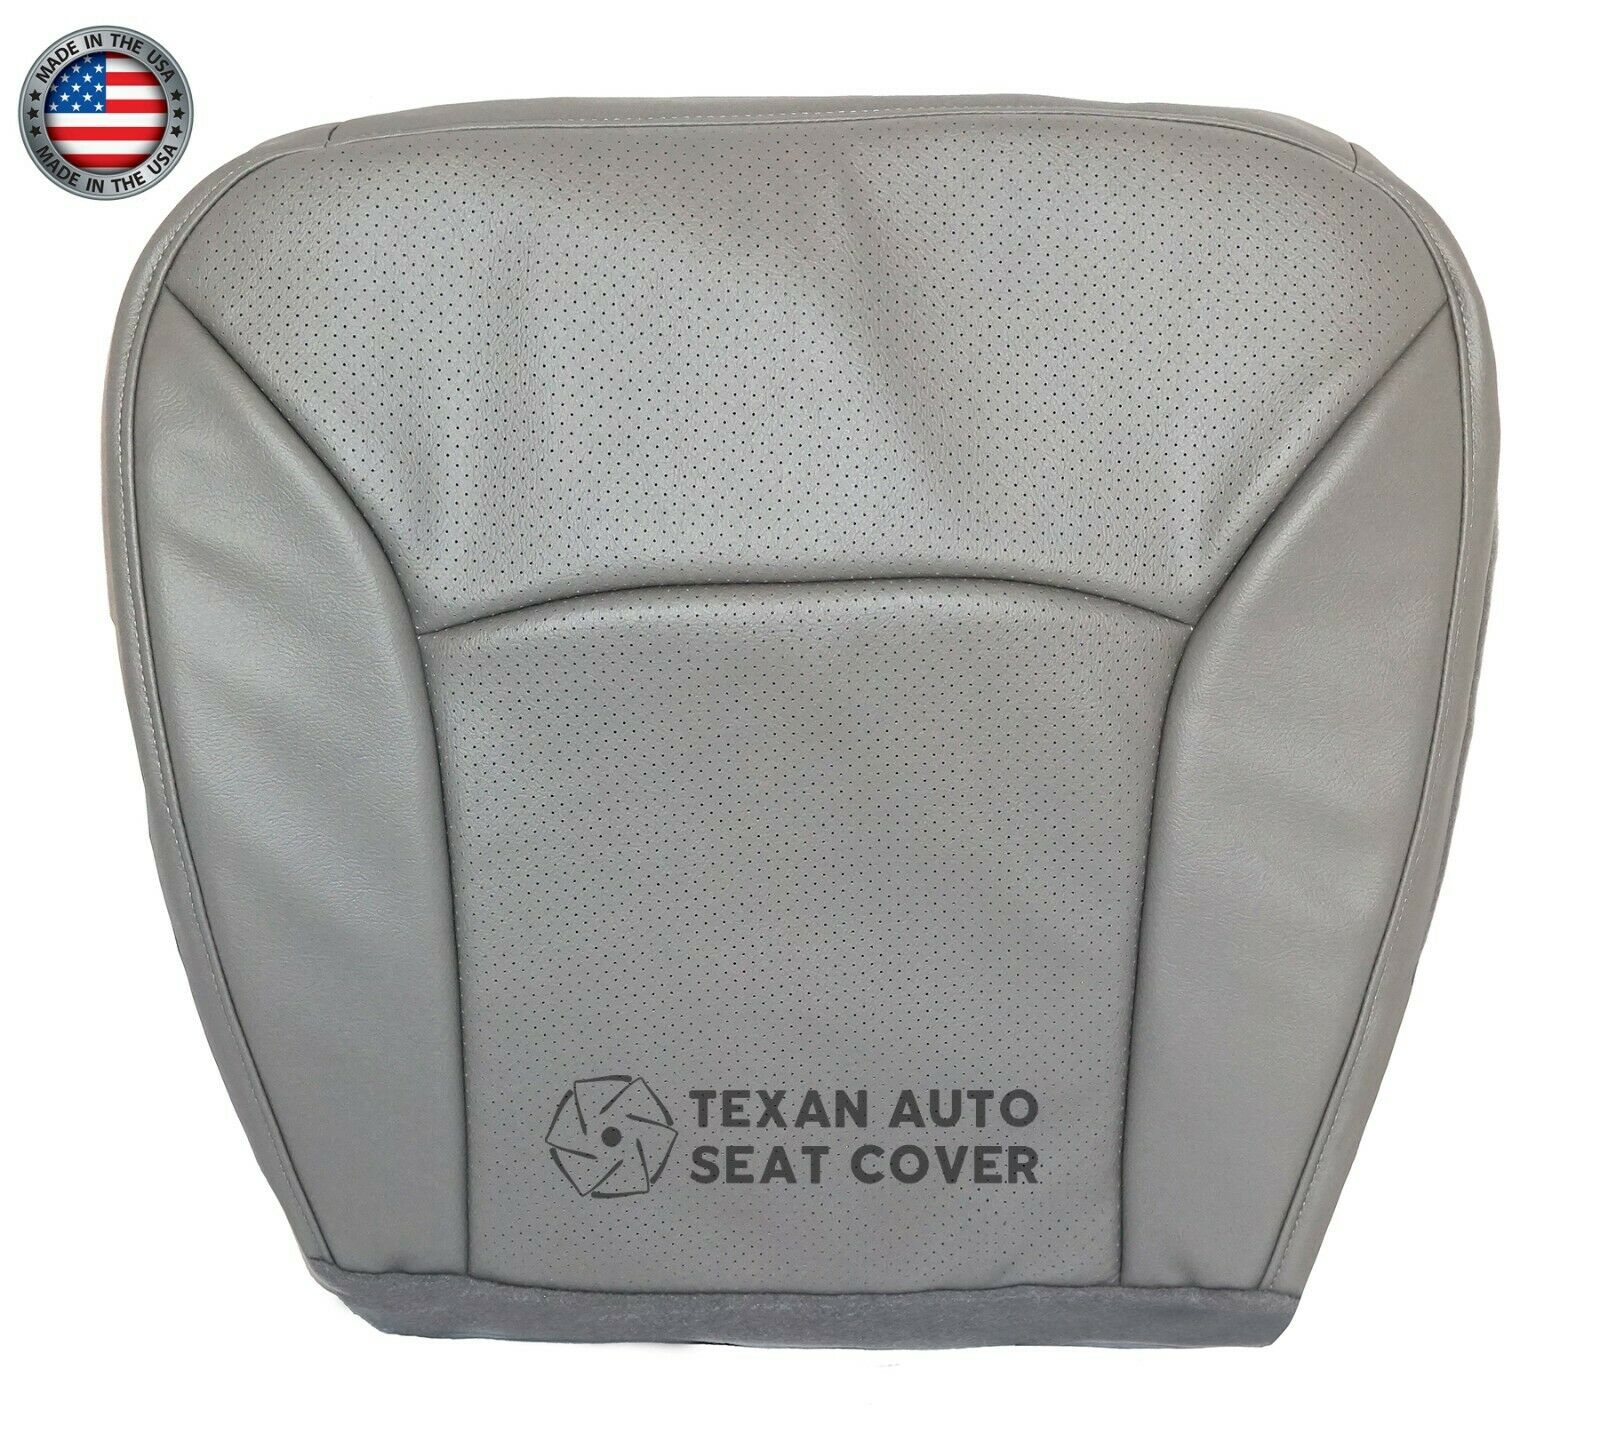 2004 2005 2006 2007 2008 Ford E150 E250 E350 E450 E550 Econoline Van Passenger Side Bottom Perforated Synthetic Leather Replacement Cover Gray